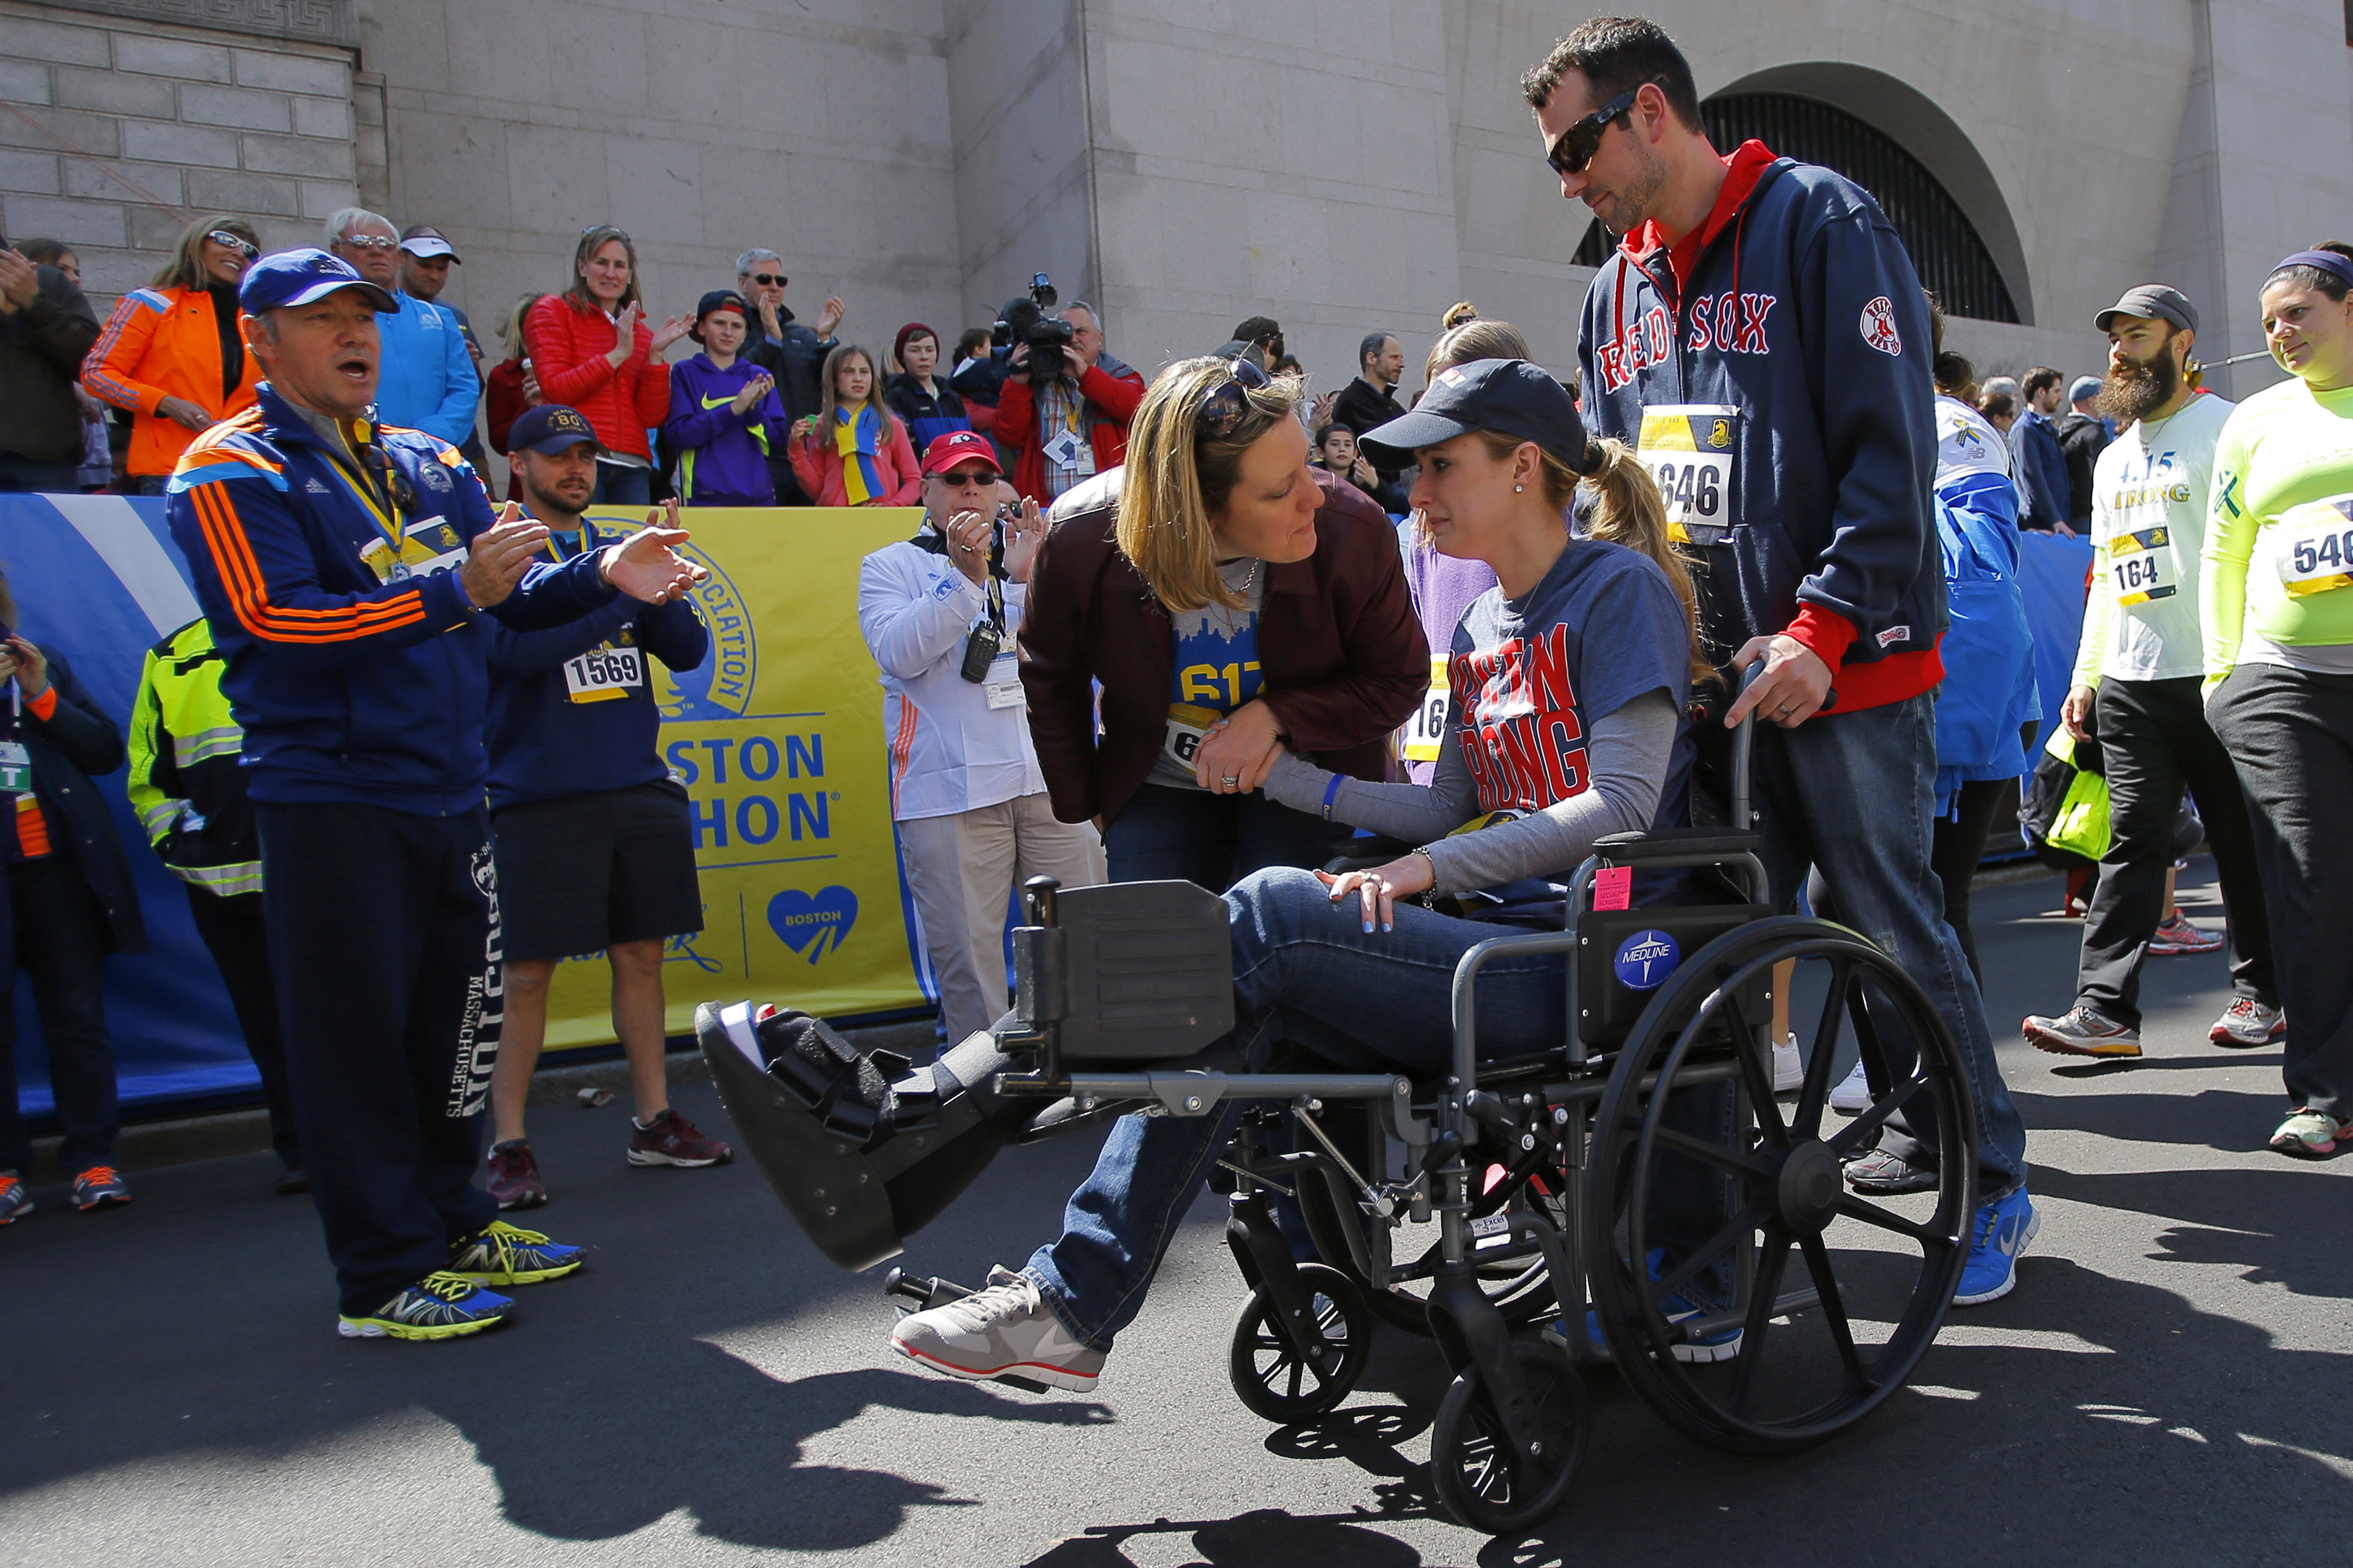 Actor Kevin Spacey (L) cheers on as 2013 Boston Marathon bombing survivor Rebekah Gregory DiMartino (2nd R) crosses the marathon finish line during a Tribute Run for survivors and first responders in Boston on April 19, 2014. (Brian Snyder—Reuters)